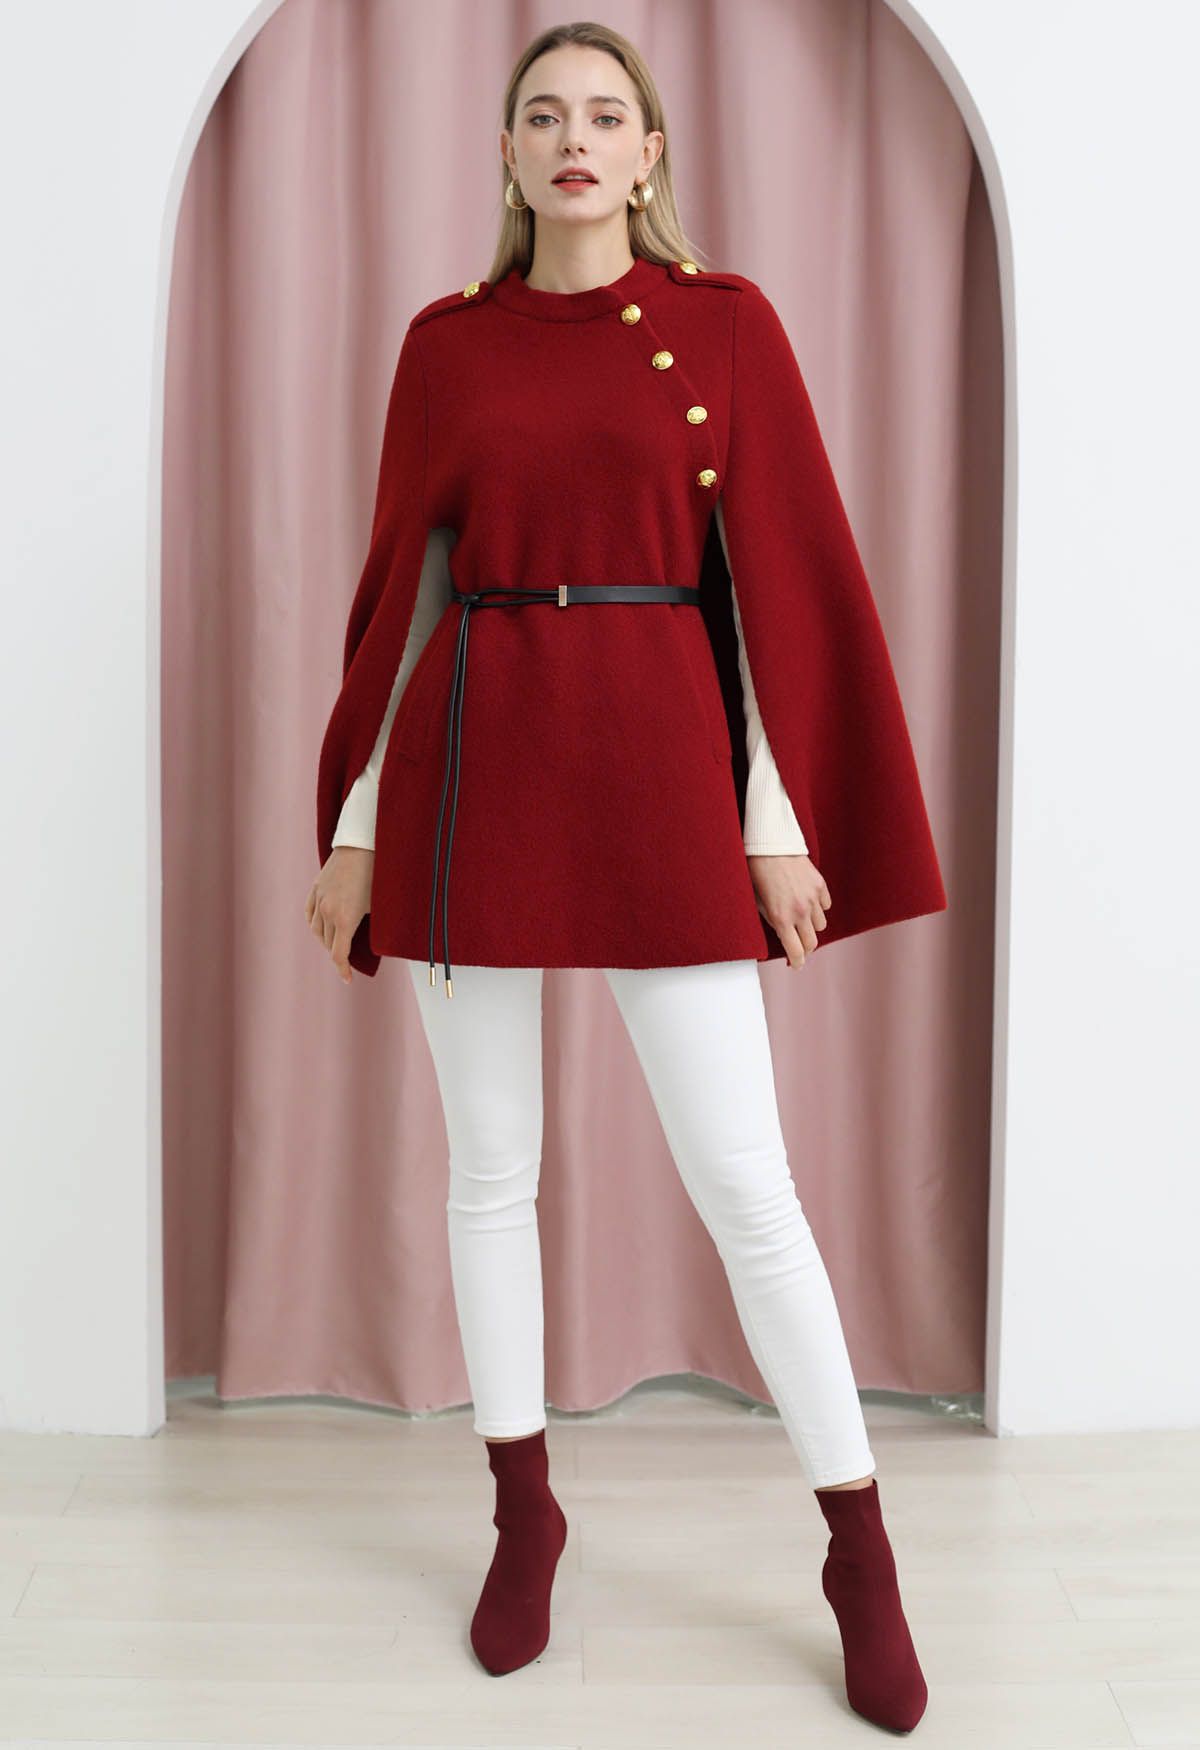 Golden Button Belted Cape Coat in Red